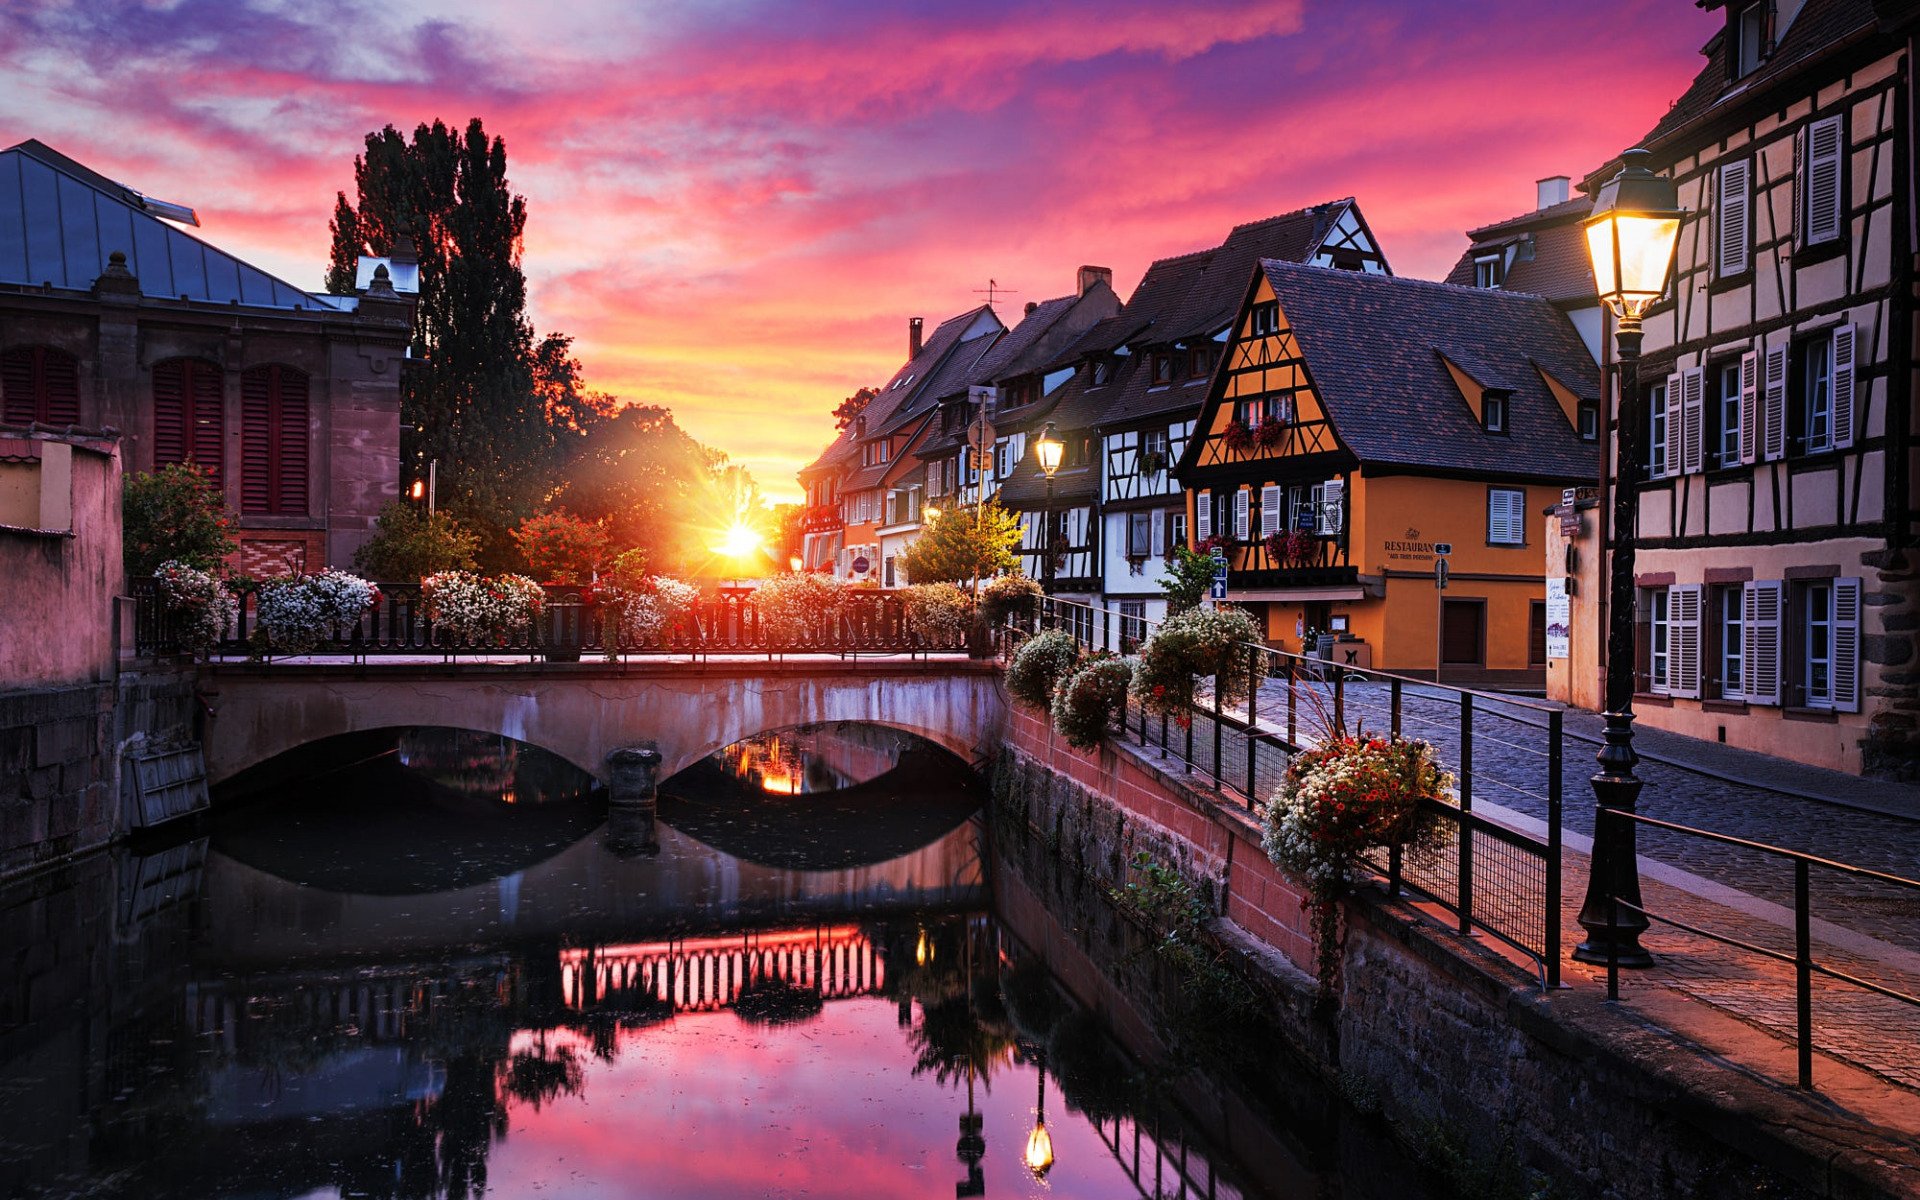 Download wallpaper Colmar, evening, sunset, buildings, french city, Colmar cityscape, Grand Est region, France for desktop with resolution 1920x1200. High Quality HD picture wallpaper